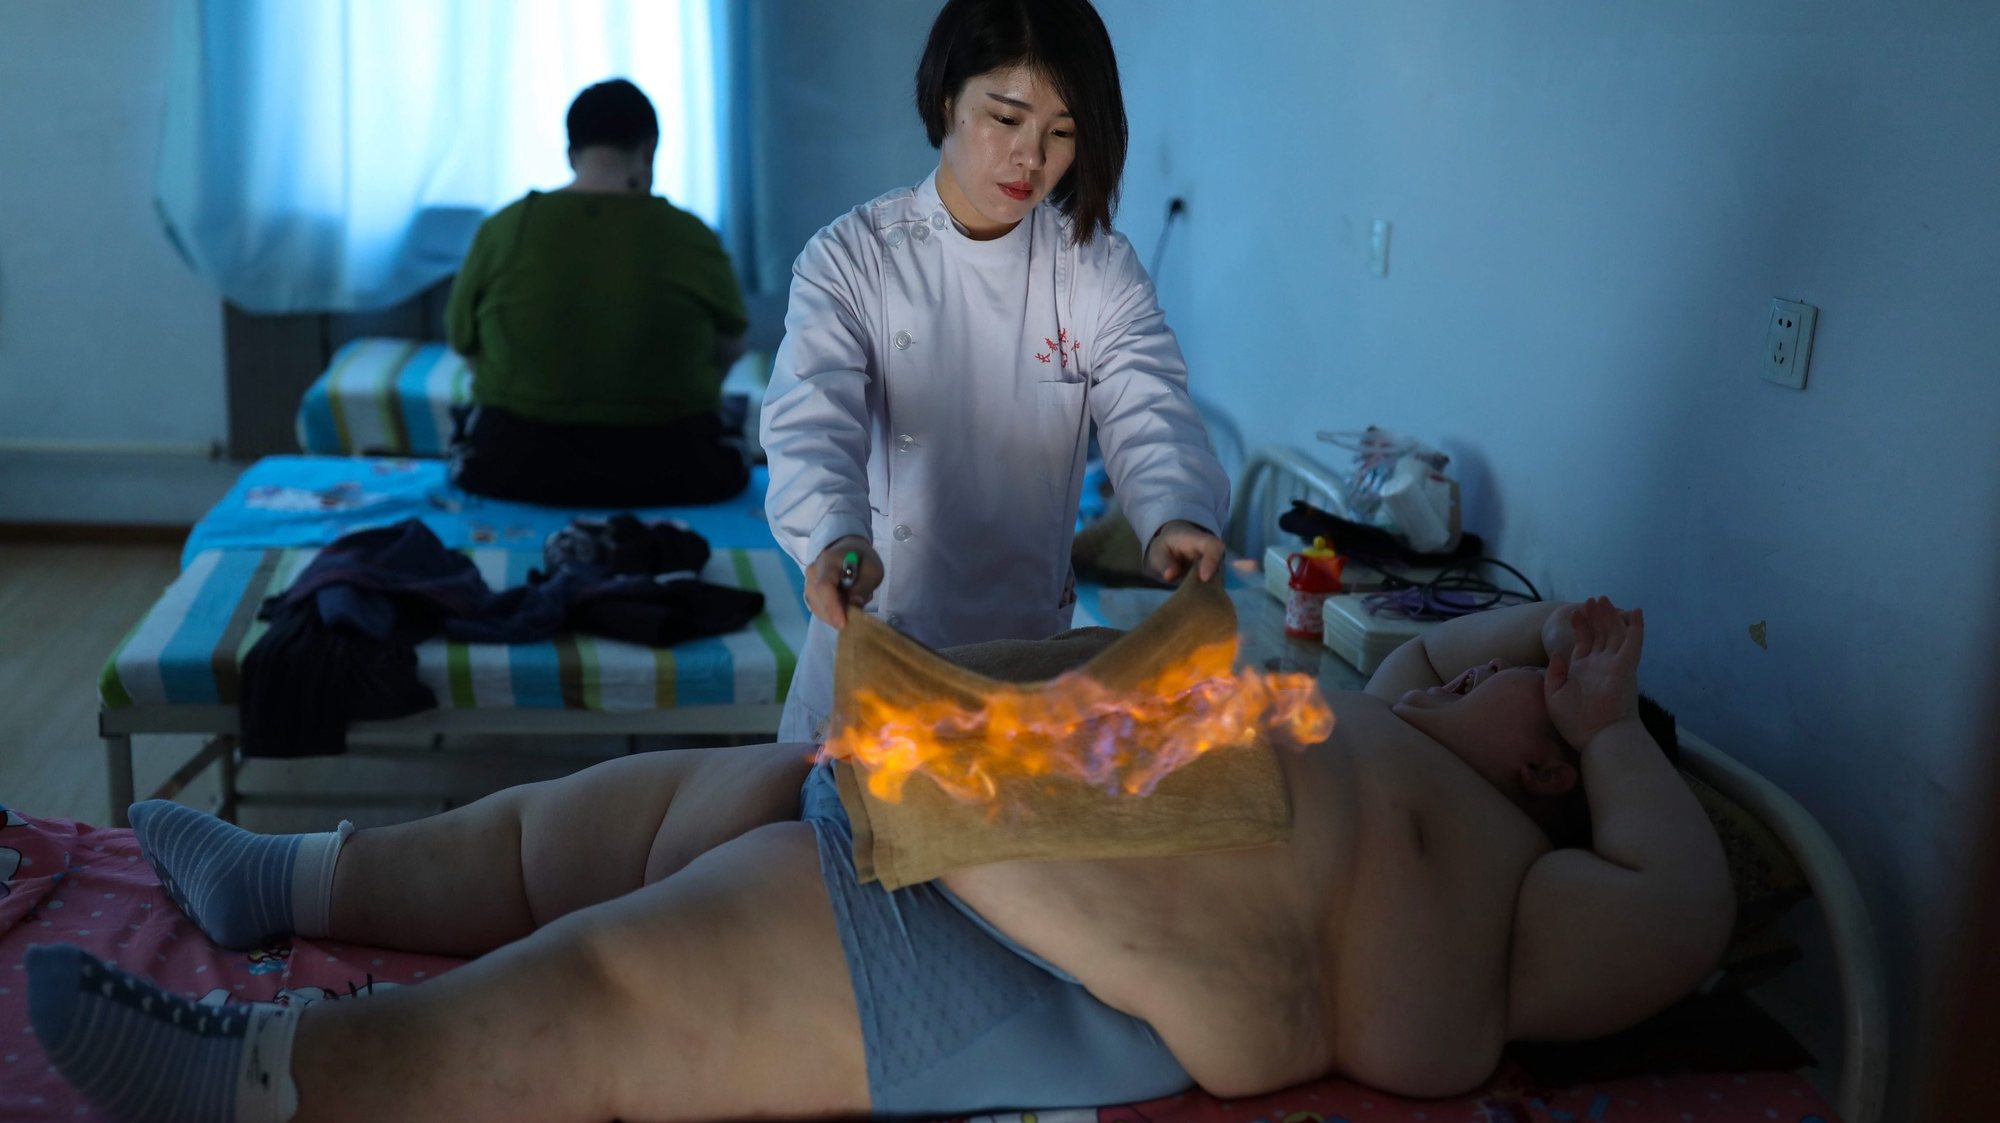 epa05660556 YEARENDER 2016 NOVEMBER
A Chinese medicine doctor performs &#039;huo liao&#039; or &#039;fire therapy&#039; on 11-year-old patient Li Hang to help him lose excess weight at the Changchun Kangda Hospital, in Changchun city, Jilin Province, China, 25 November 2016. Li Hang initially weighed 167 kilograms and is undergoing treatment at the clinic for obesity caused by a genetic disorder called Prader-Willi syndrome (PWS).  EPA/Tian Weitao CHINA OUT